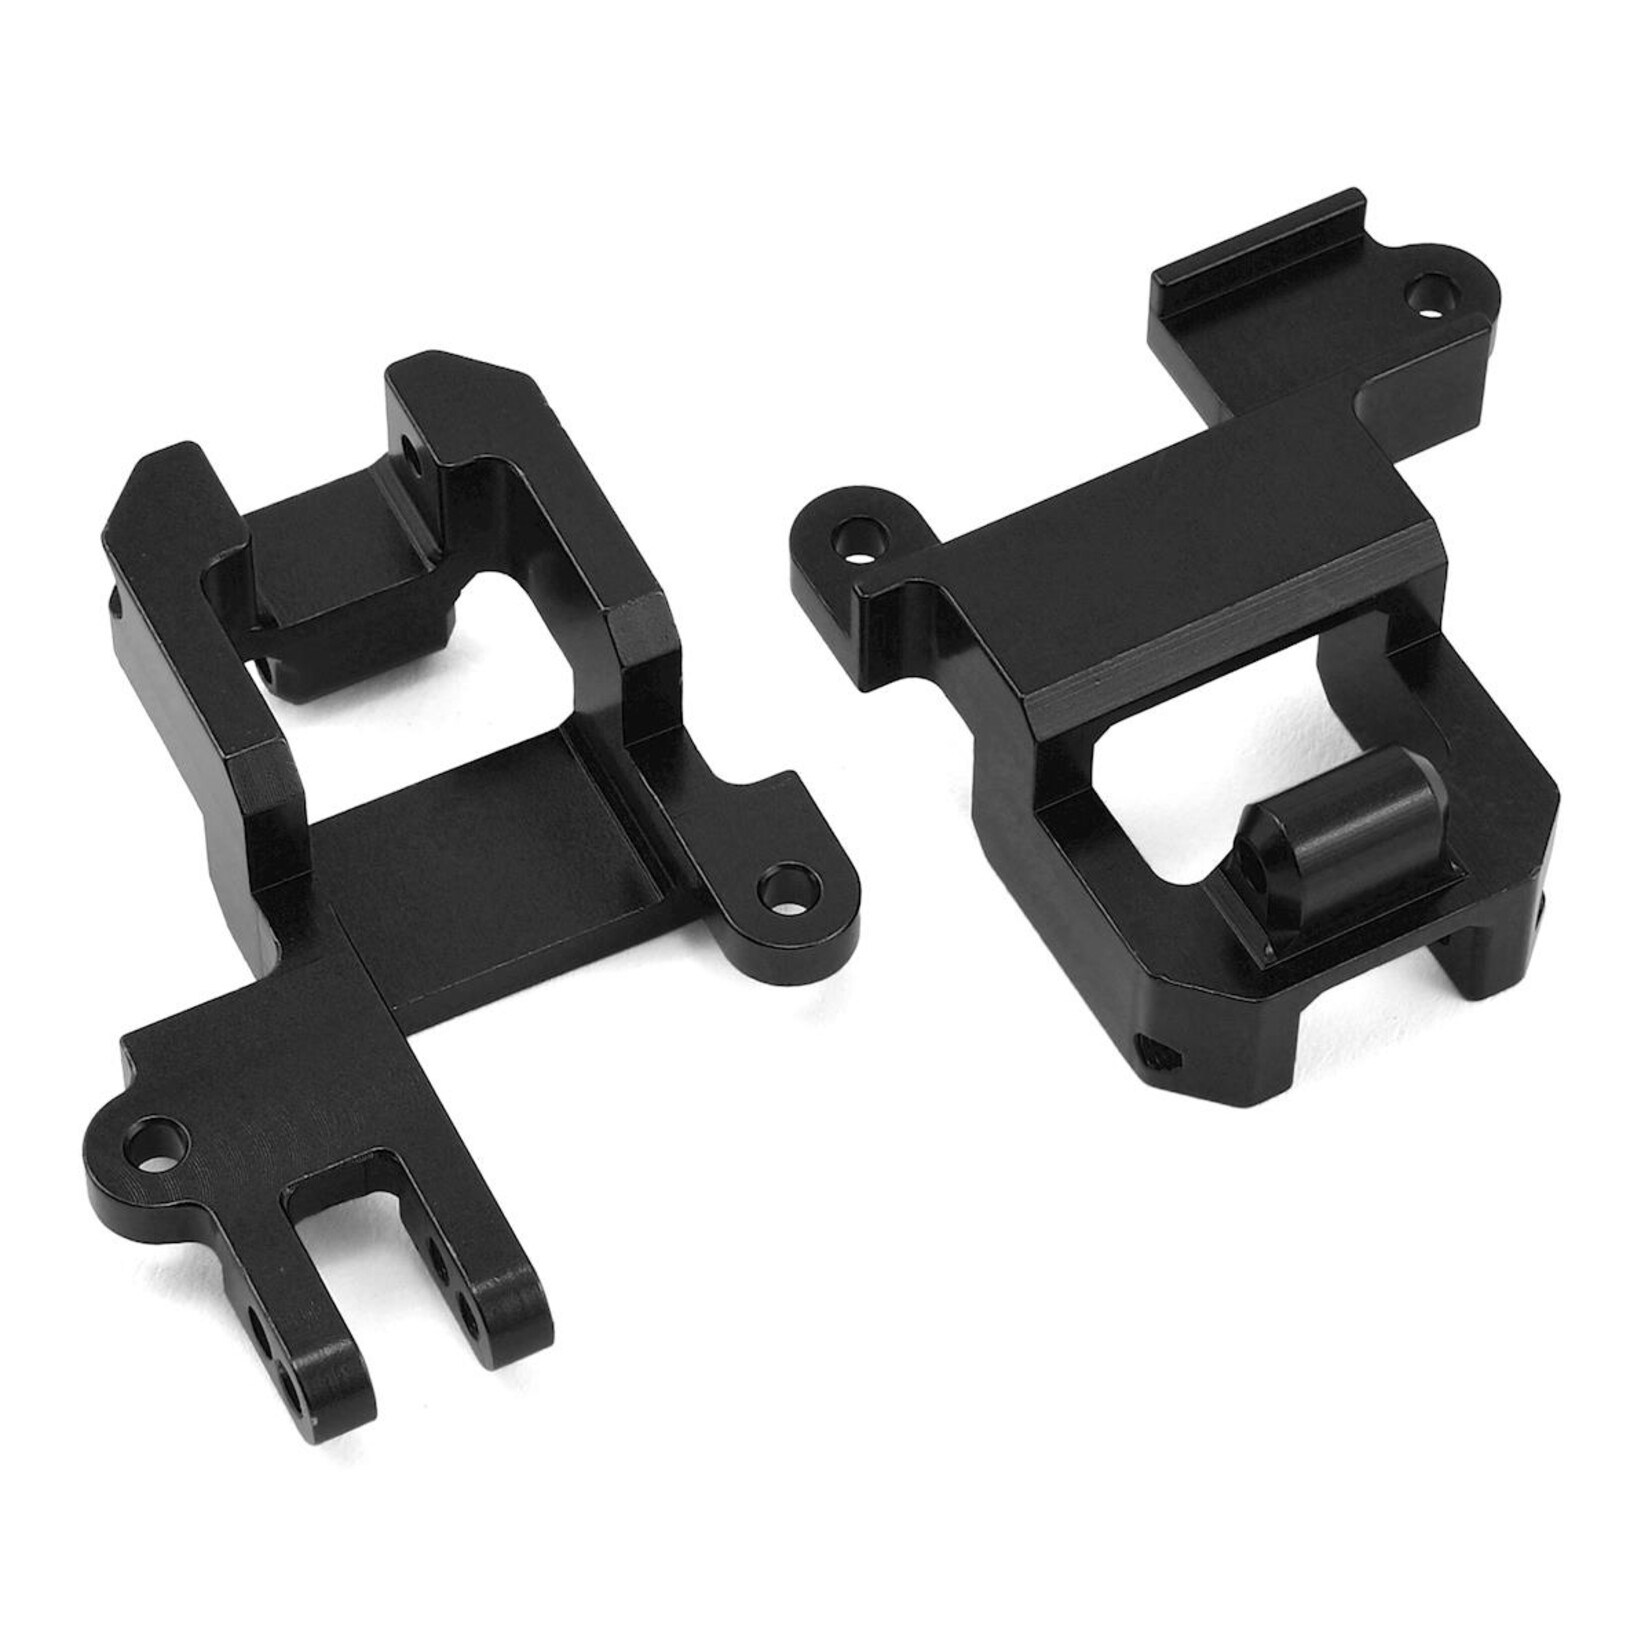 ST Racing Concepts ST Racing Concepts Traxxas TRX-4 HD Front Shock Towers/Panhard Mount (Black) #ST8216FBK